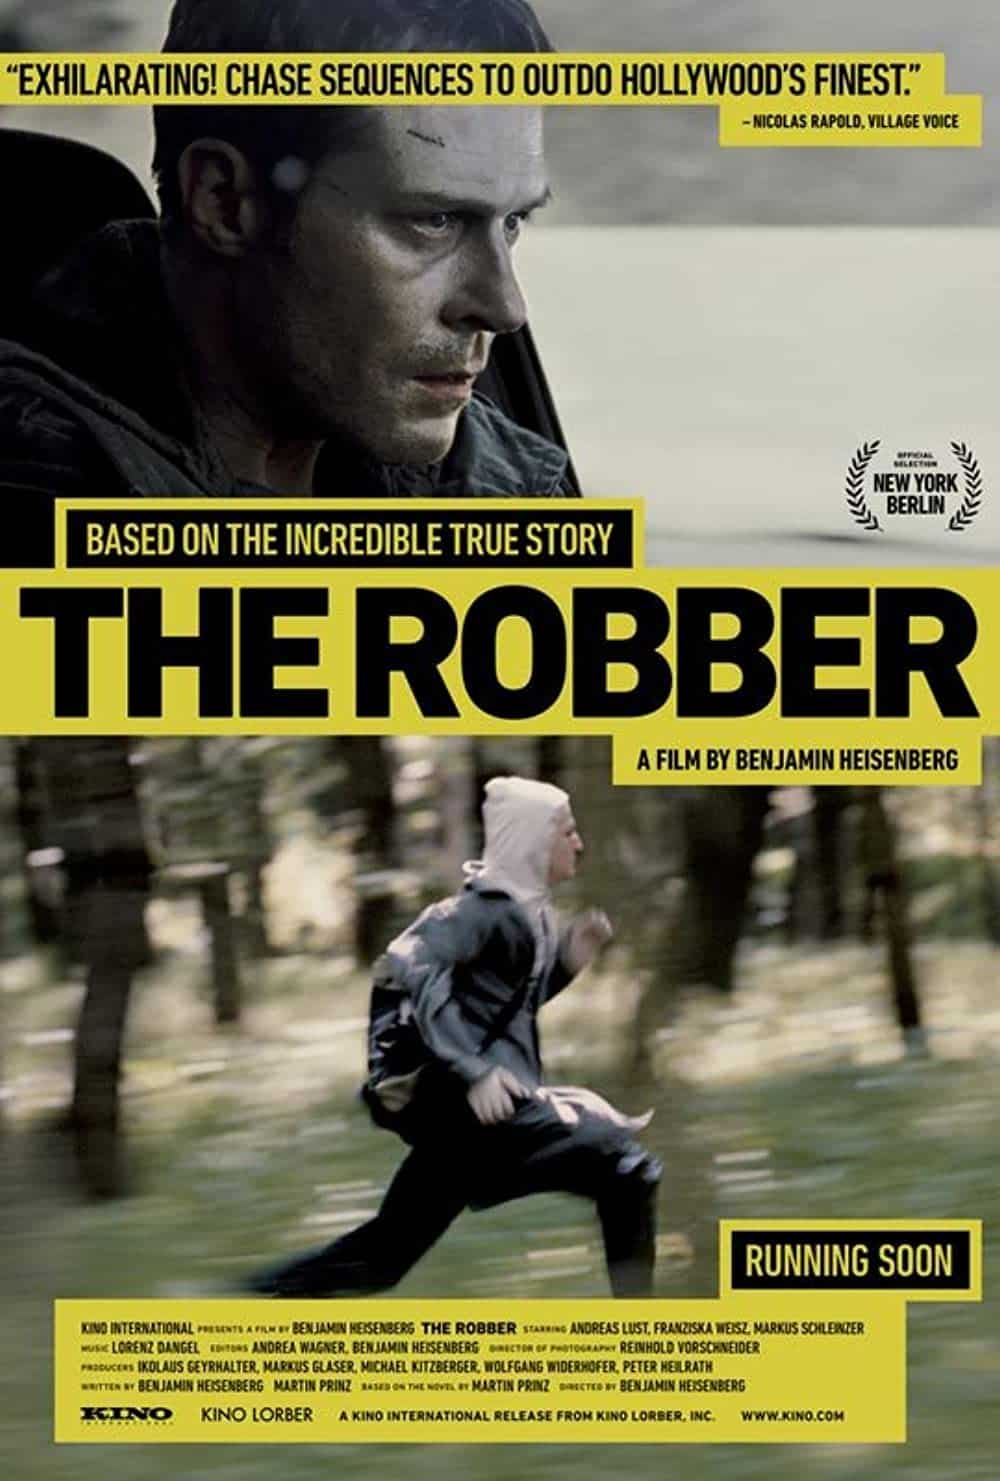 The Robber (2010) 19 Best Running Movies You Can't Miss